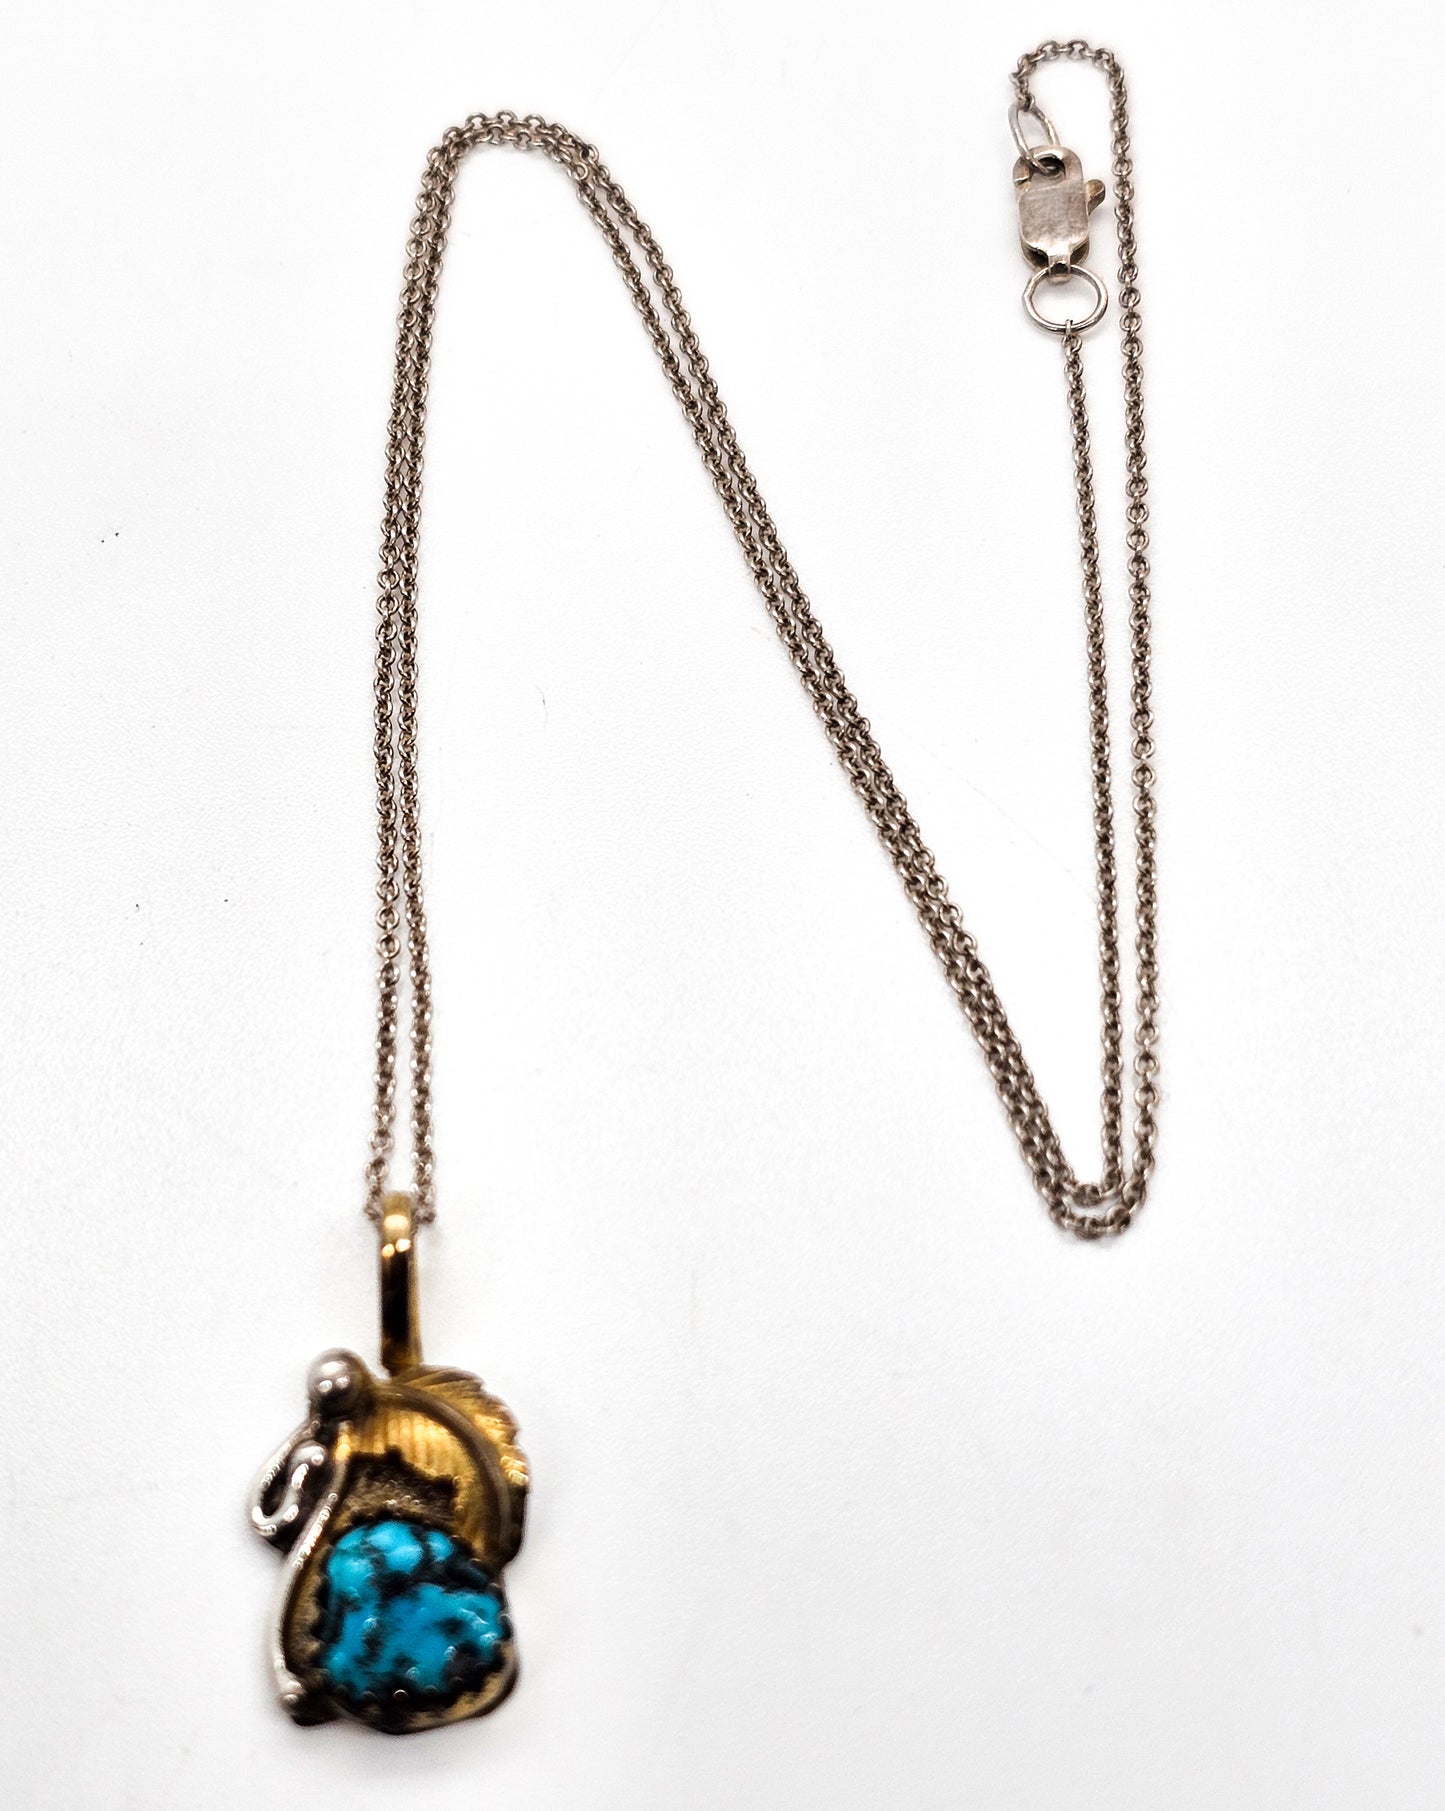 Virginia C Turquoise Native American Gold Filled Sterling Silver vintage pendant necklace